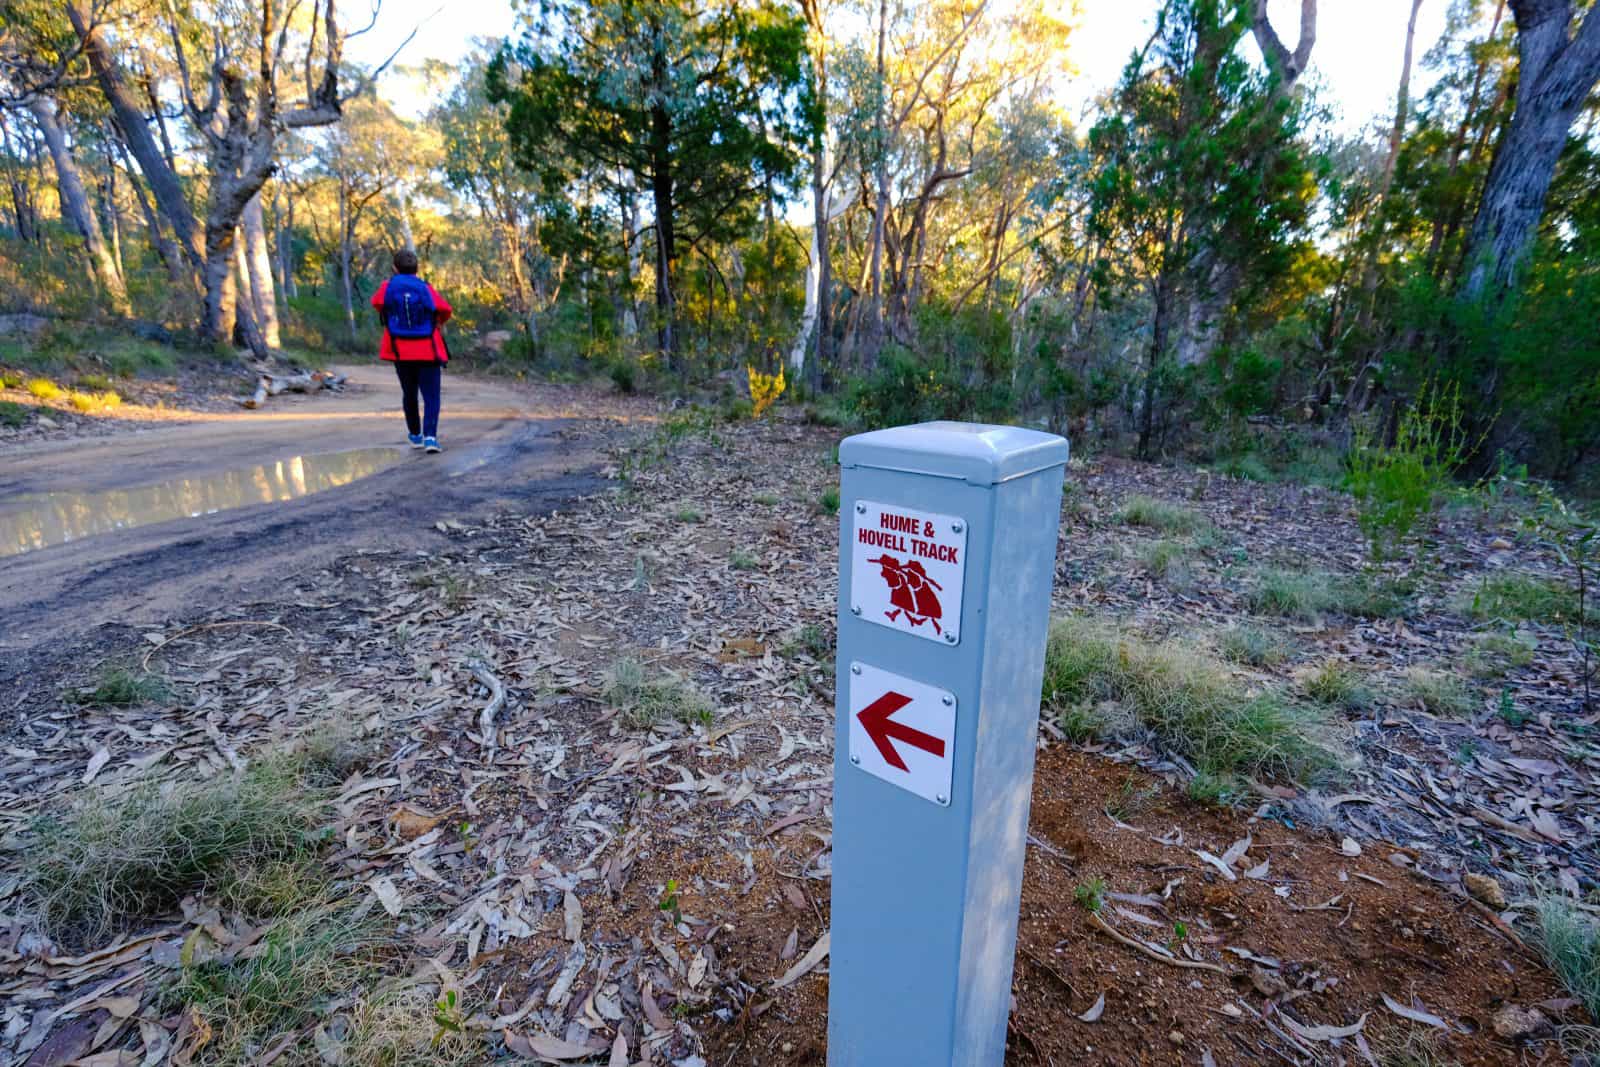 Hume and Hovell Track